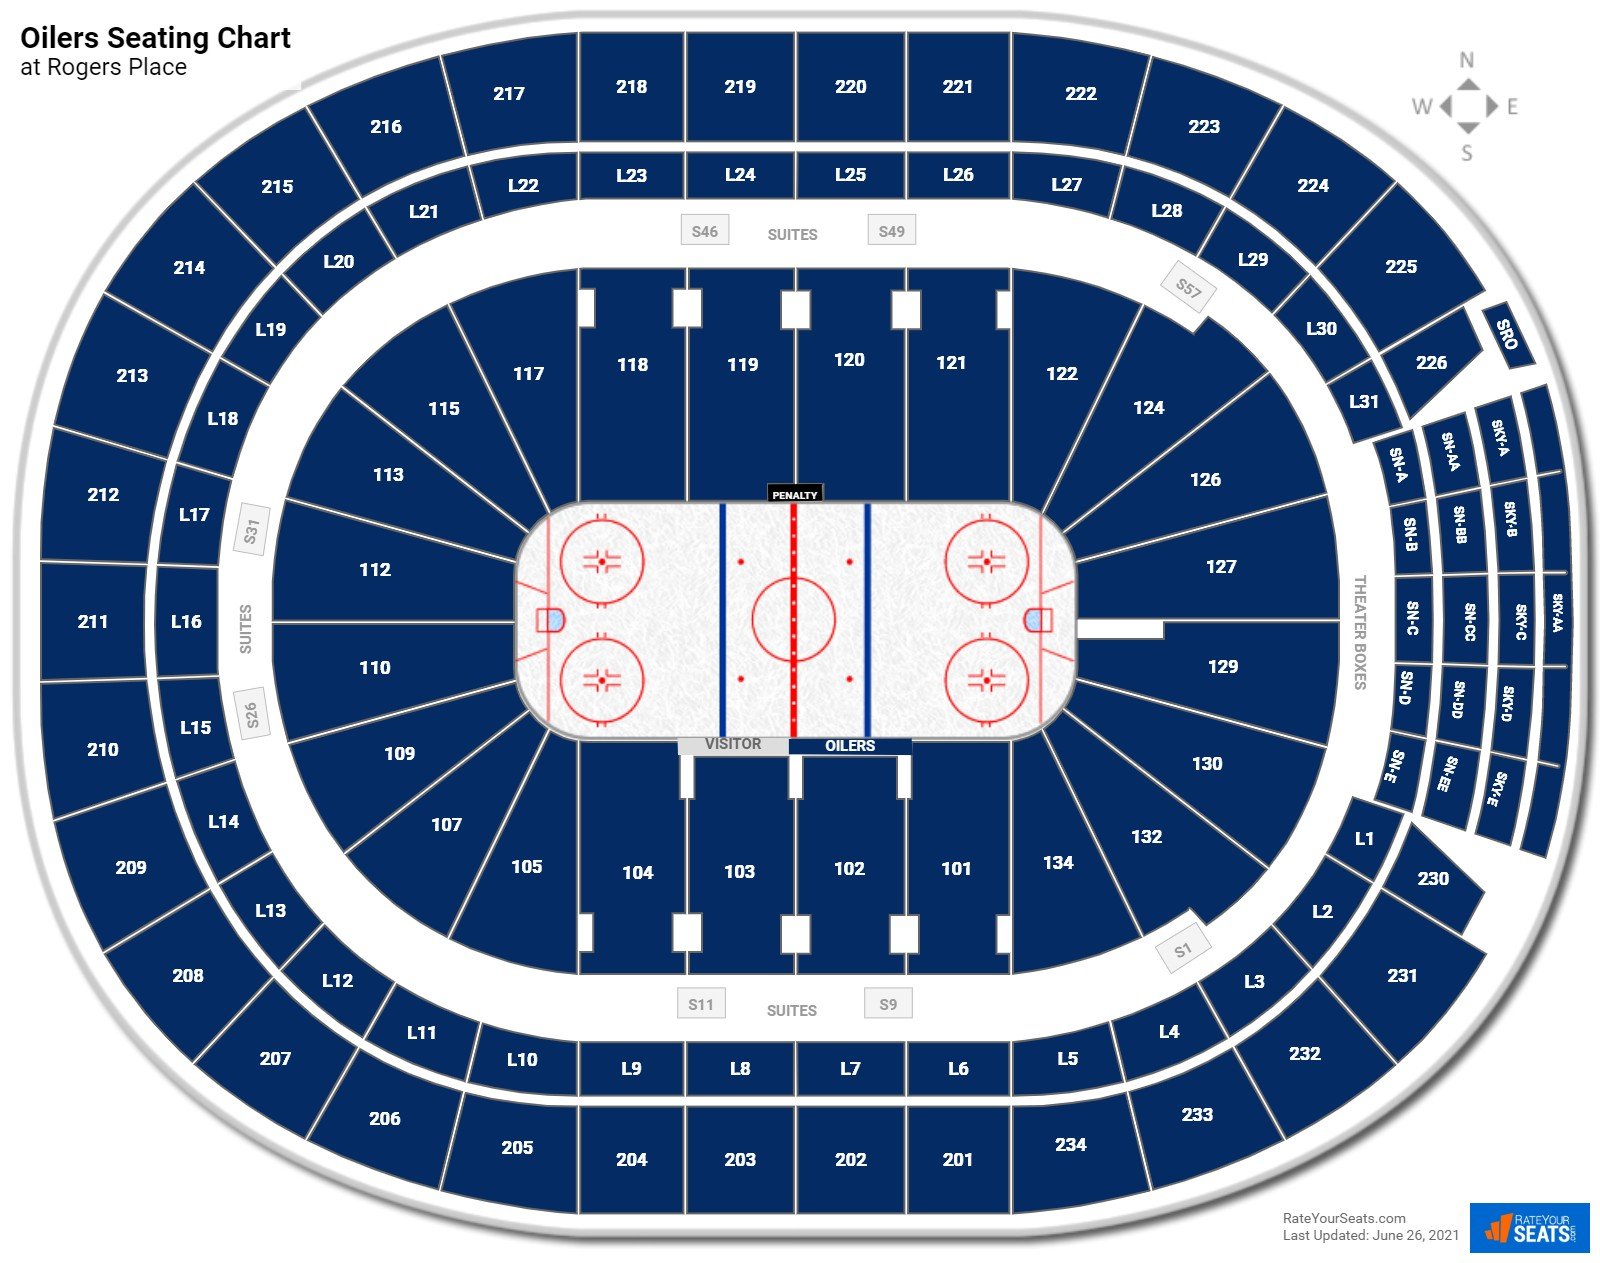 Breakdown Of The Rogers Centre Seating Chart